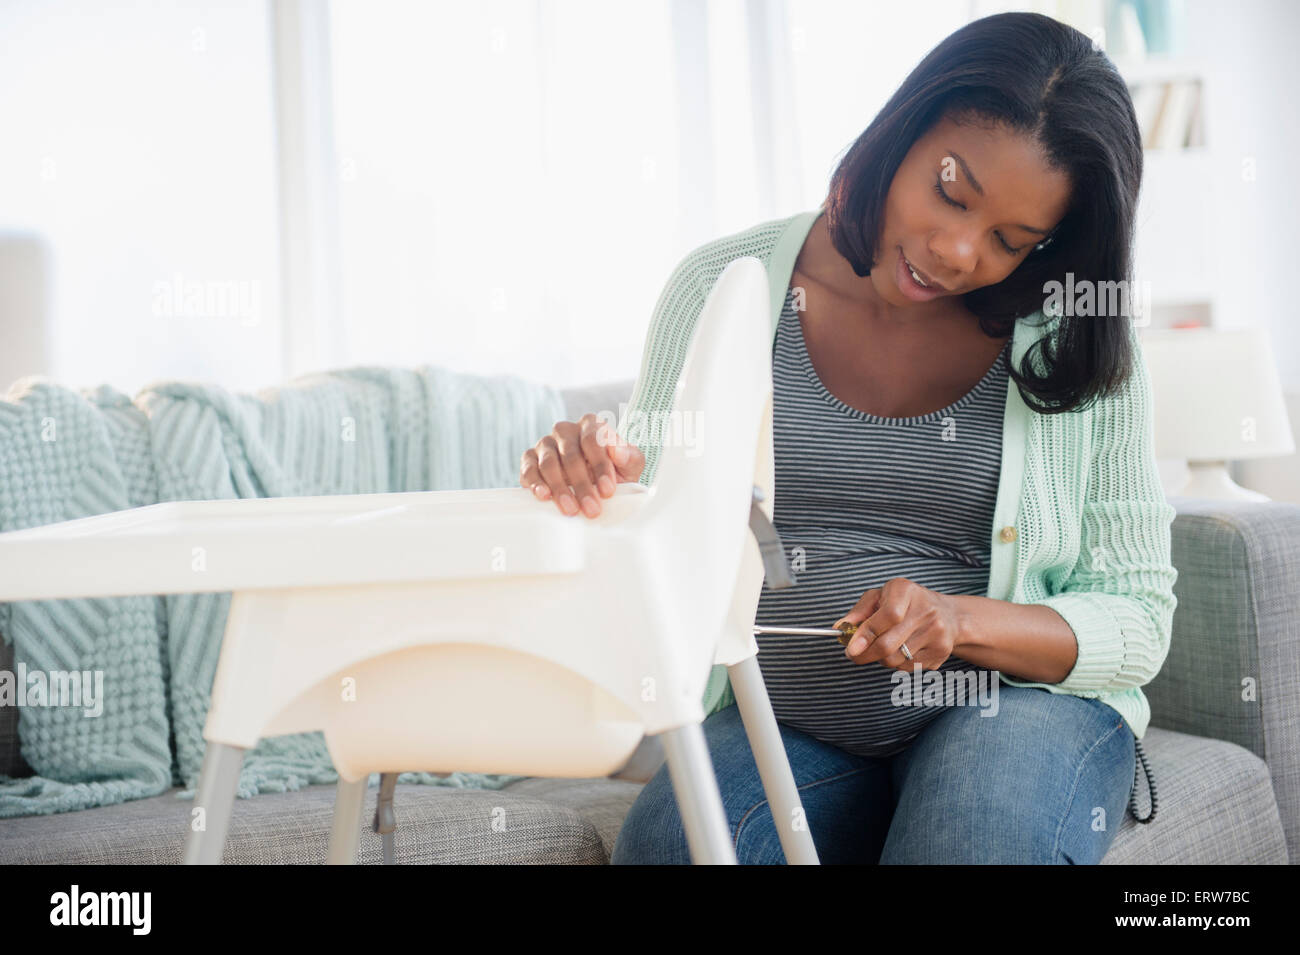 Black pregnant woman assembling high chair in living room Stock Photo